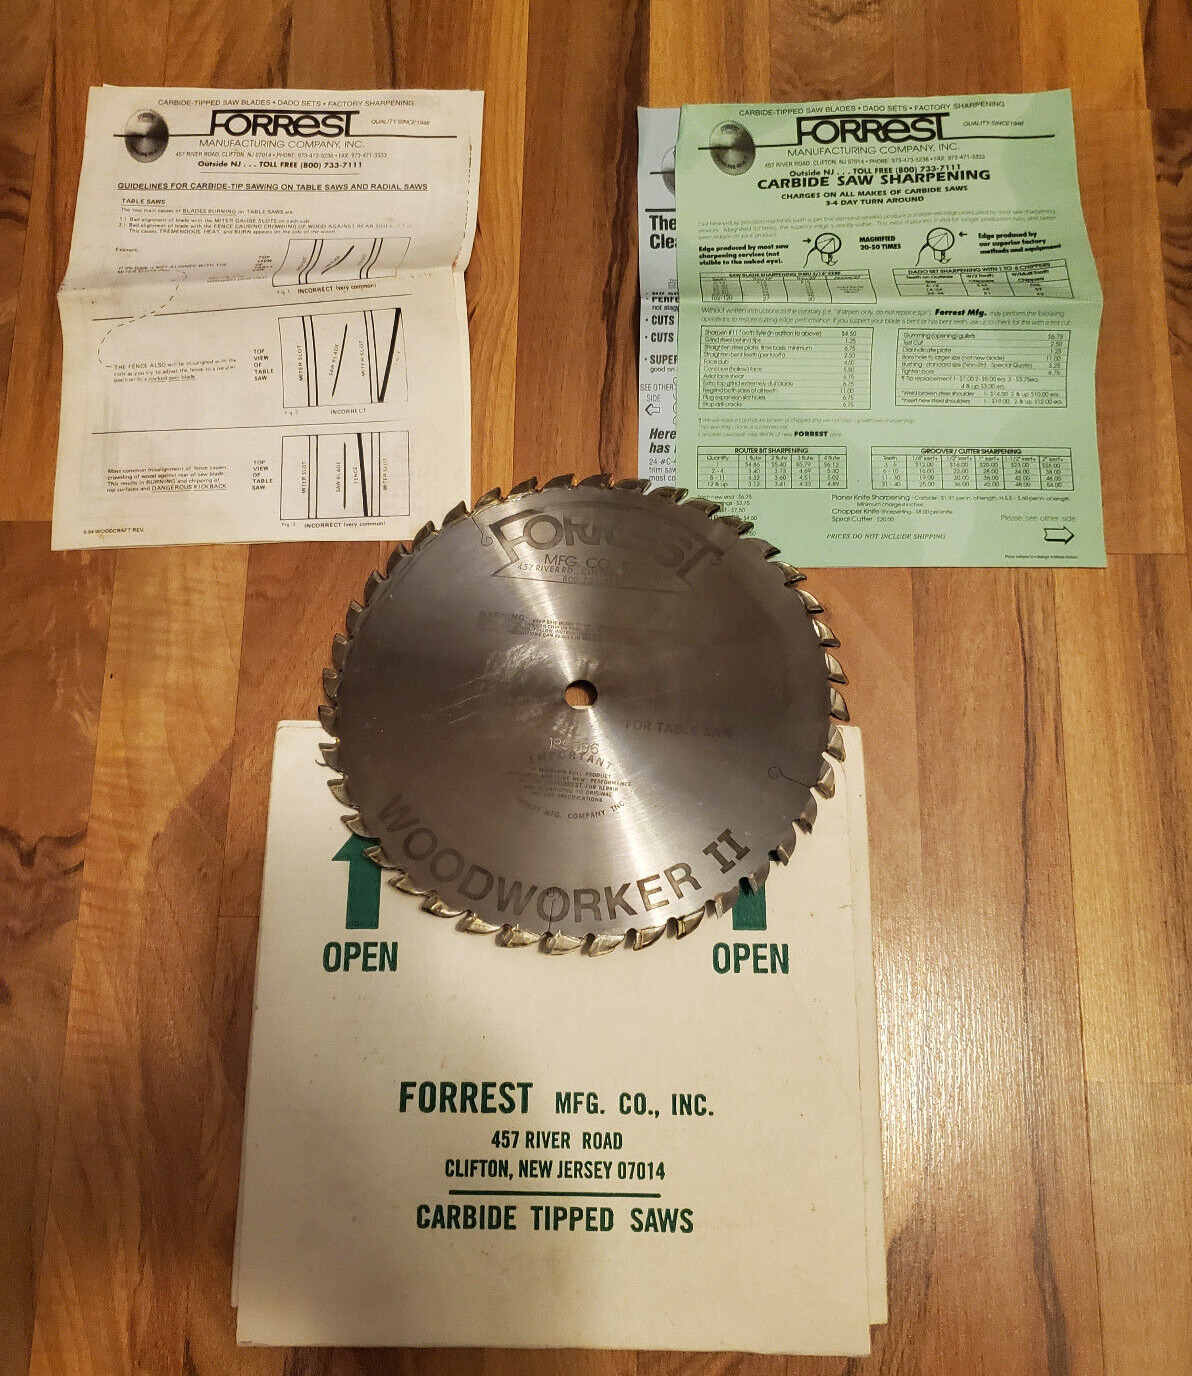 Forrest Woodworker II 10 in Table Saw Blade 189586. Plastic coating on tips